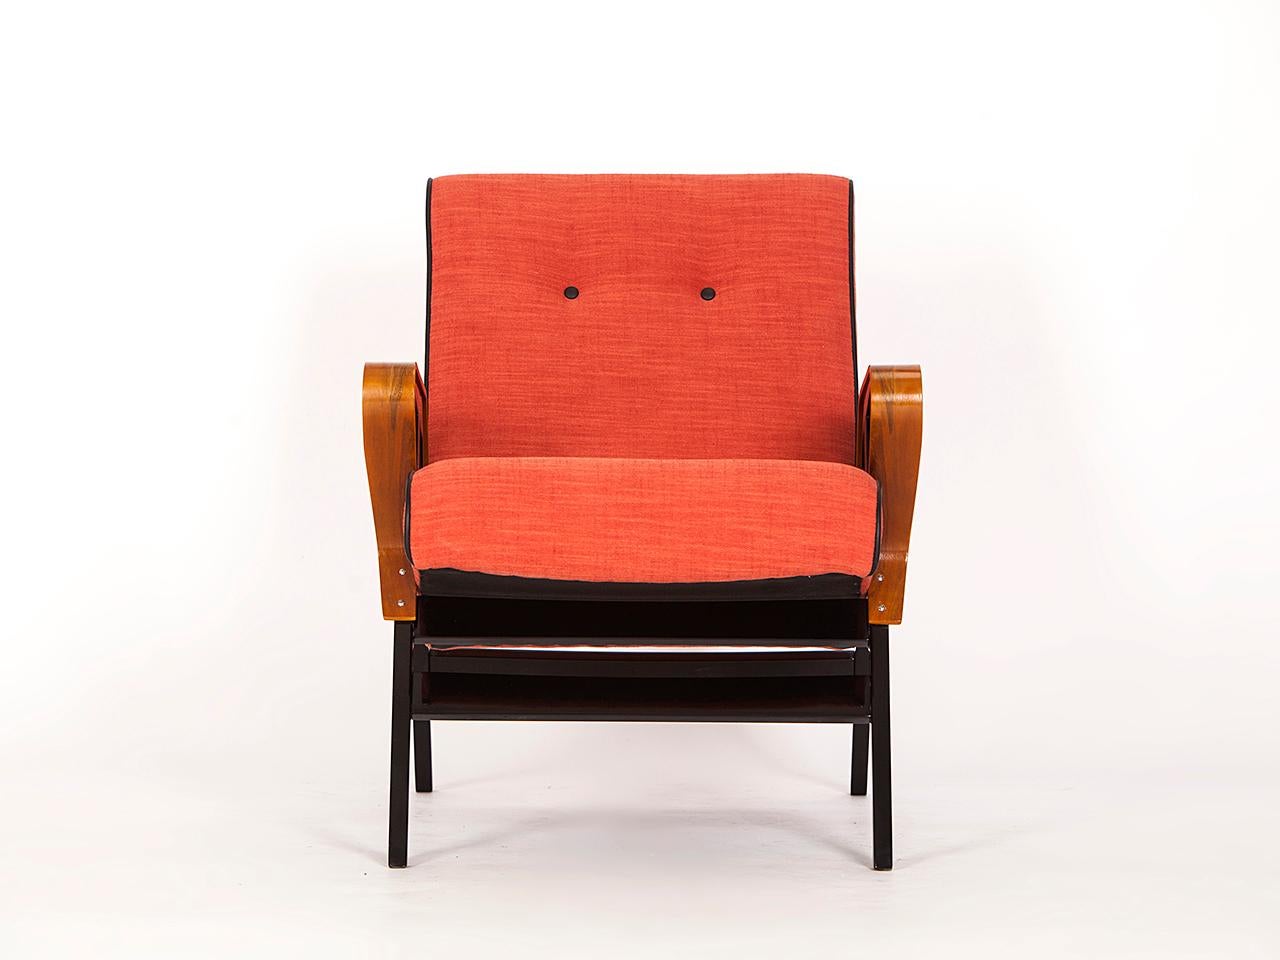 This lounge chair was produced in the 1960s by the Czechoslovak company Tatra Pravenec. This piece has been completely restored with new linen upholstery and newly painted wooden parts. The armrests are made with veneered walnut.